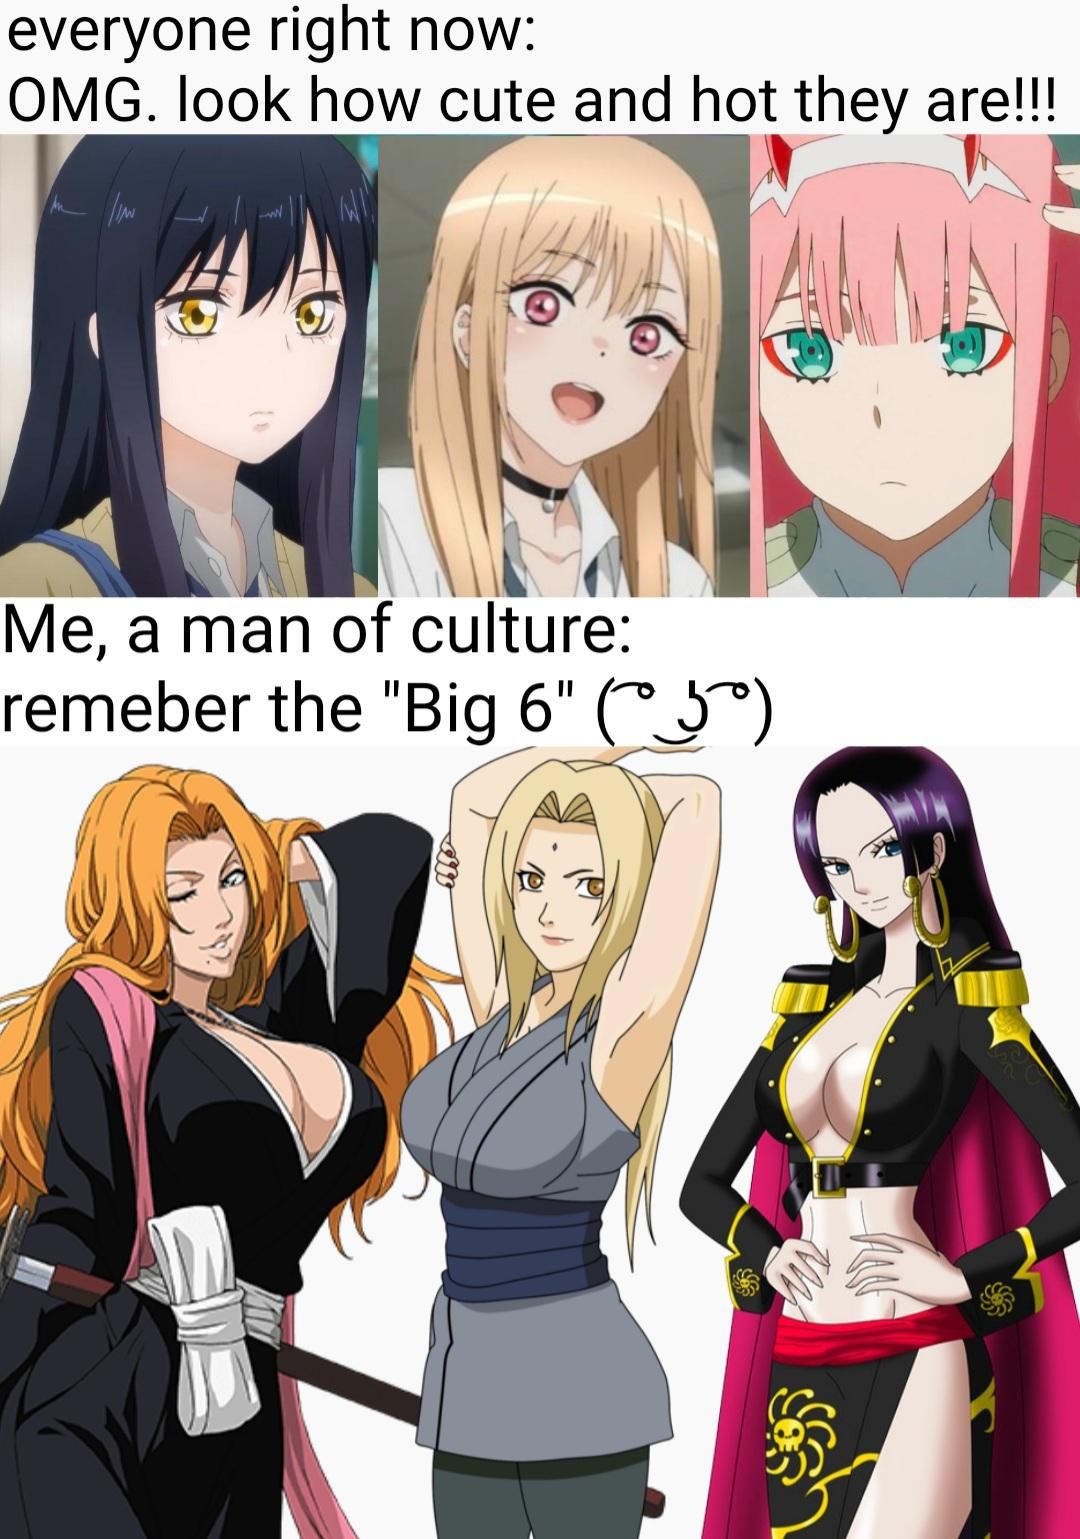 "The Big 6" Only true men of culture understand this!